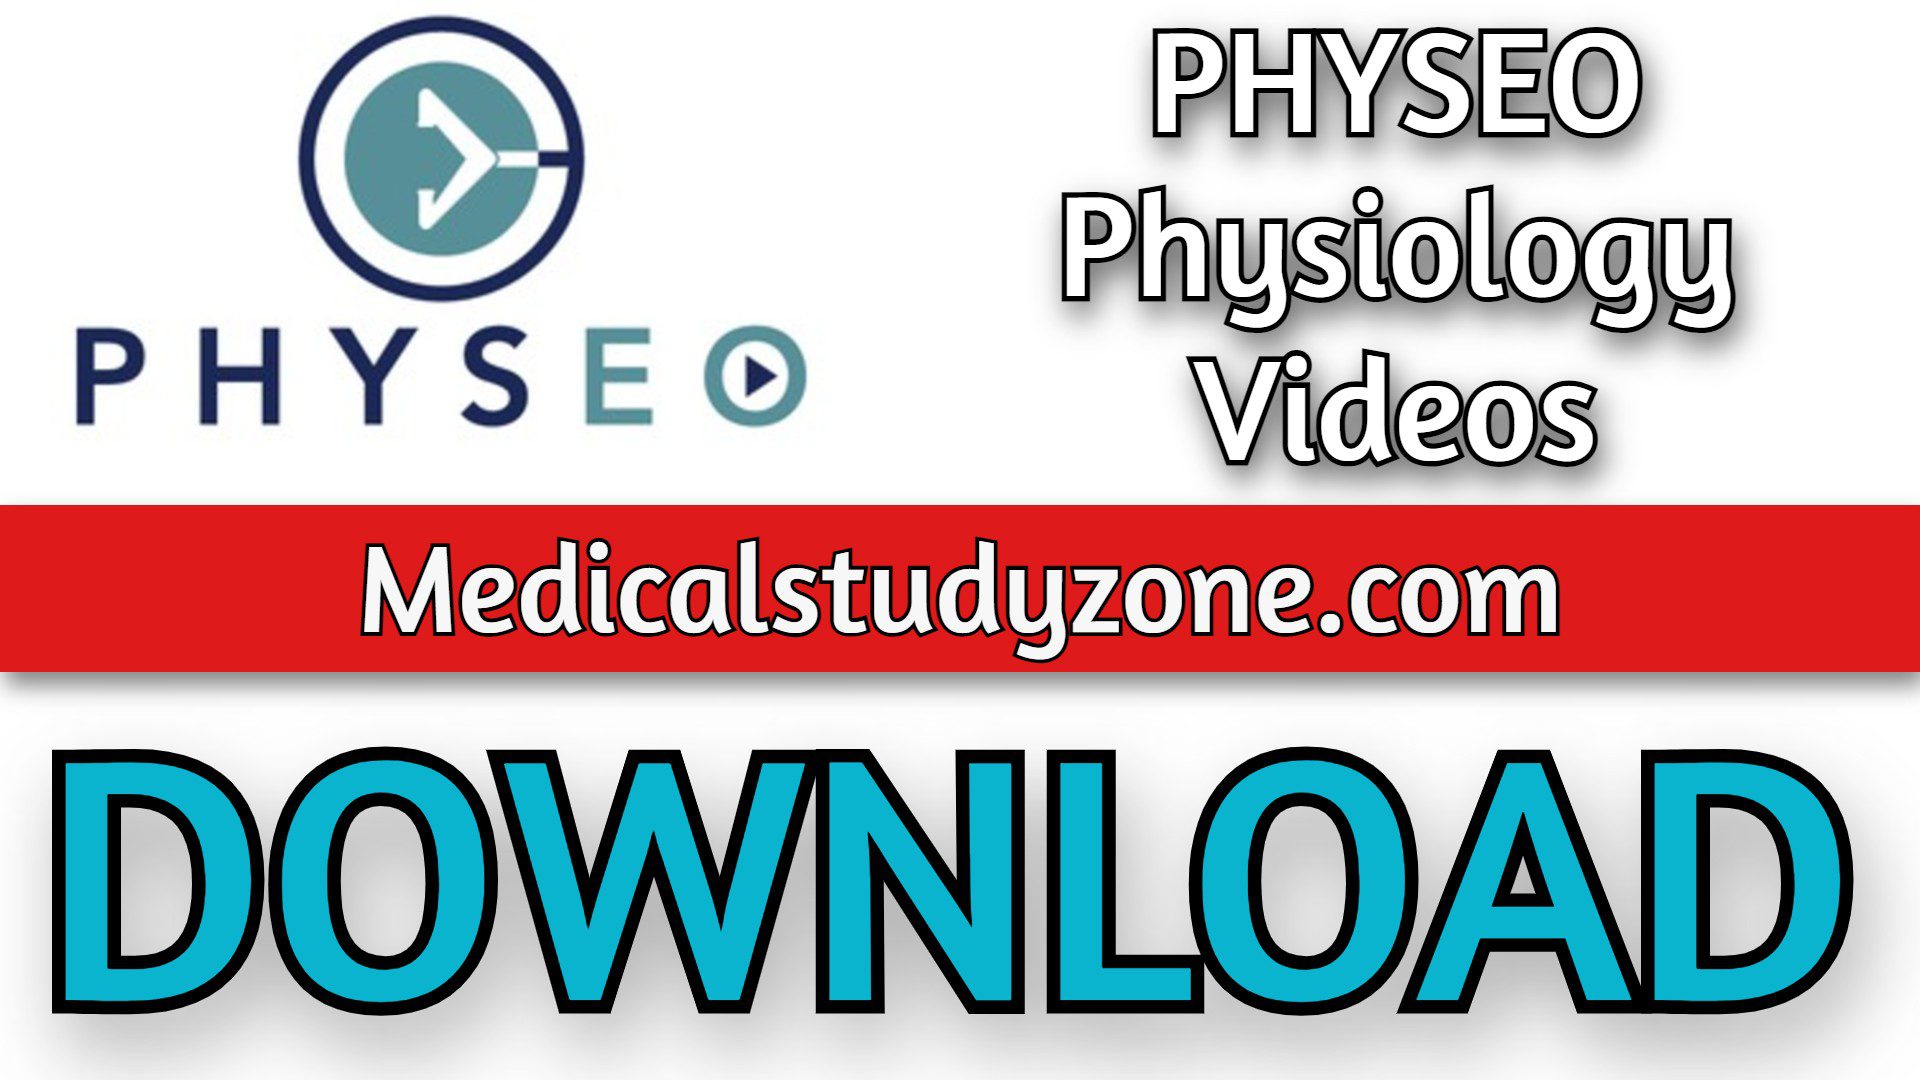 PHYSEO Physiology Videos 2023 Free Download